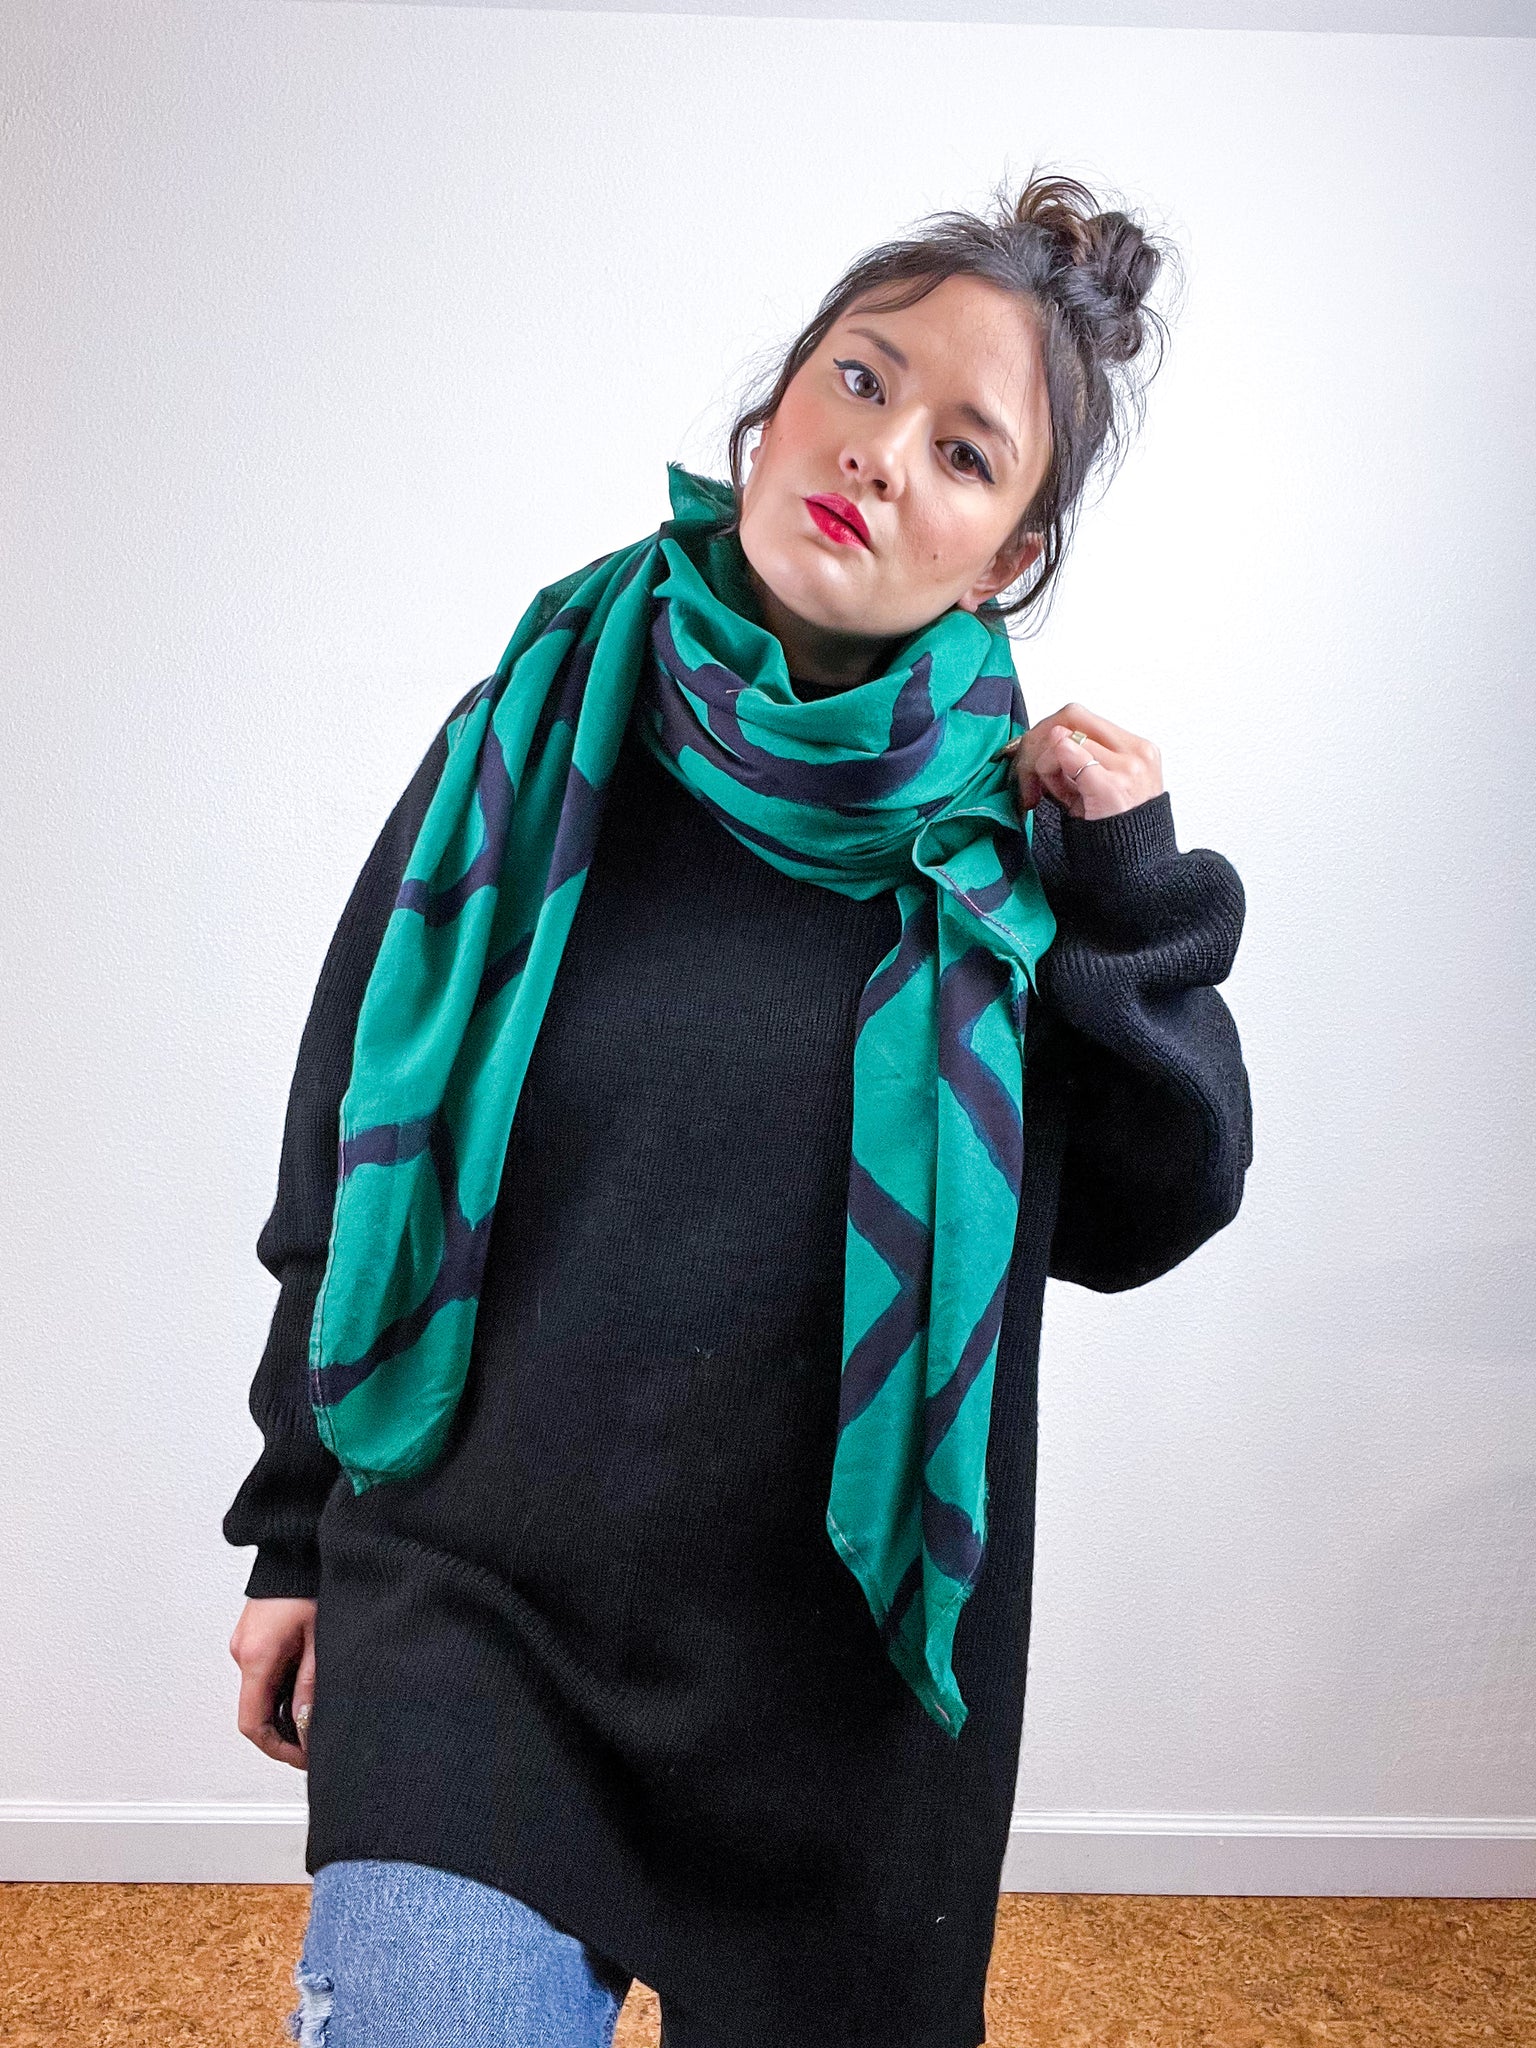 Hand-Dyed Cotton Voile Scarf Emerald Black Windowpane